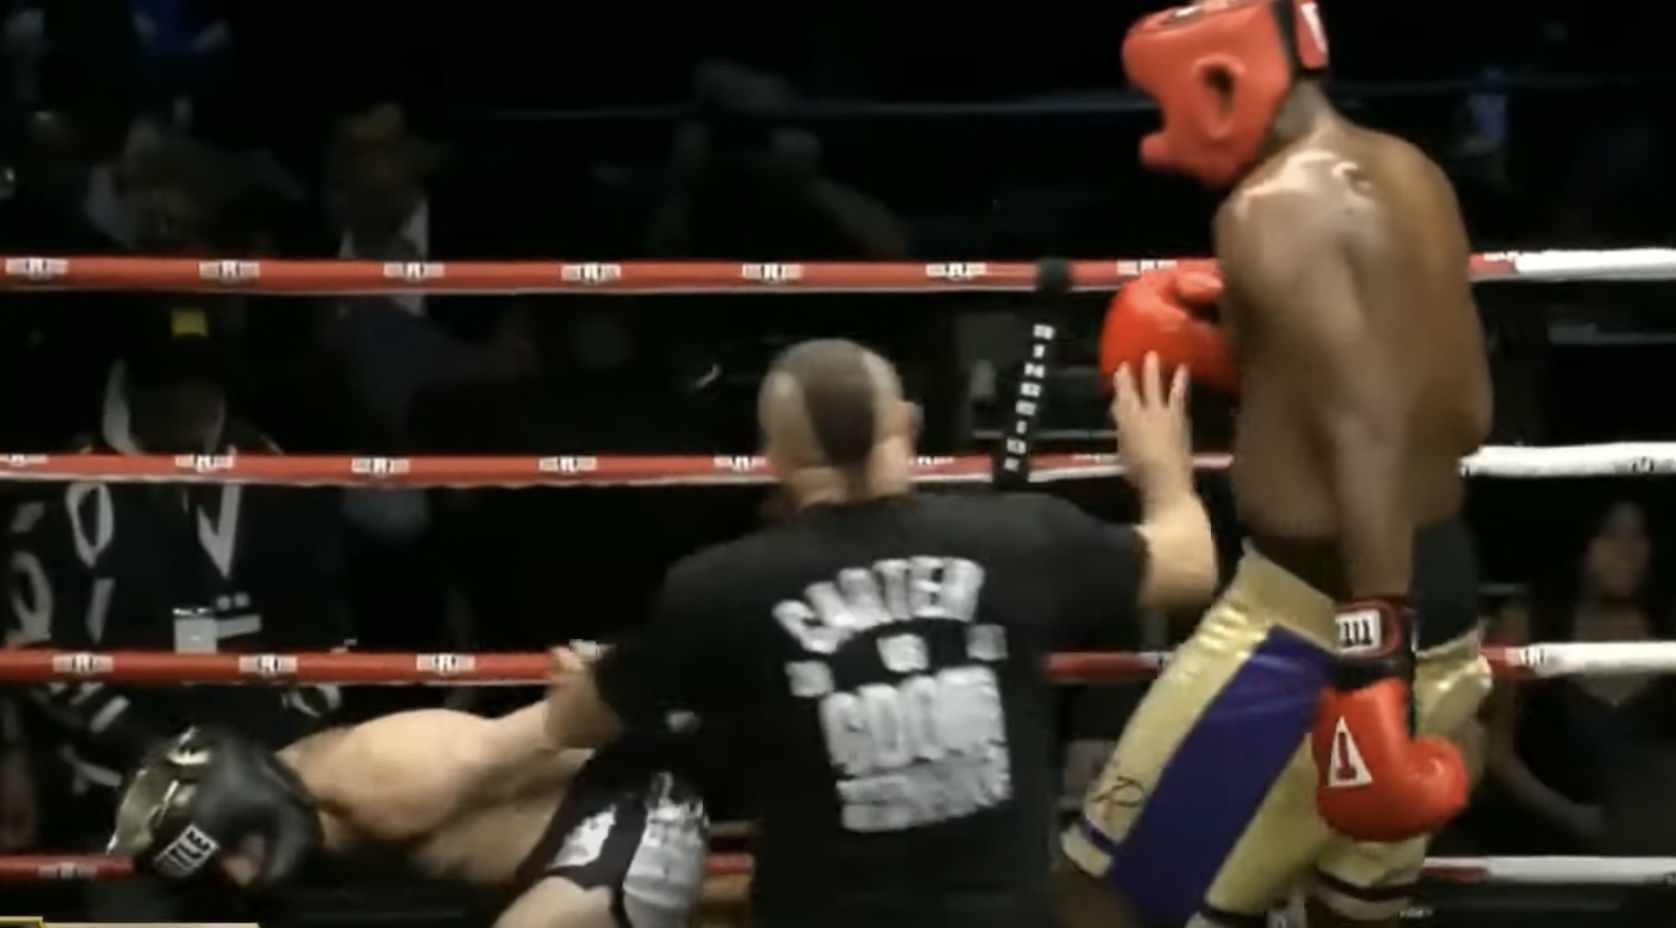 Carter falls backward on one knee after being hit by Odom